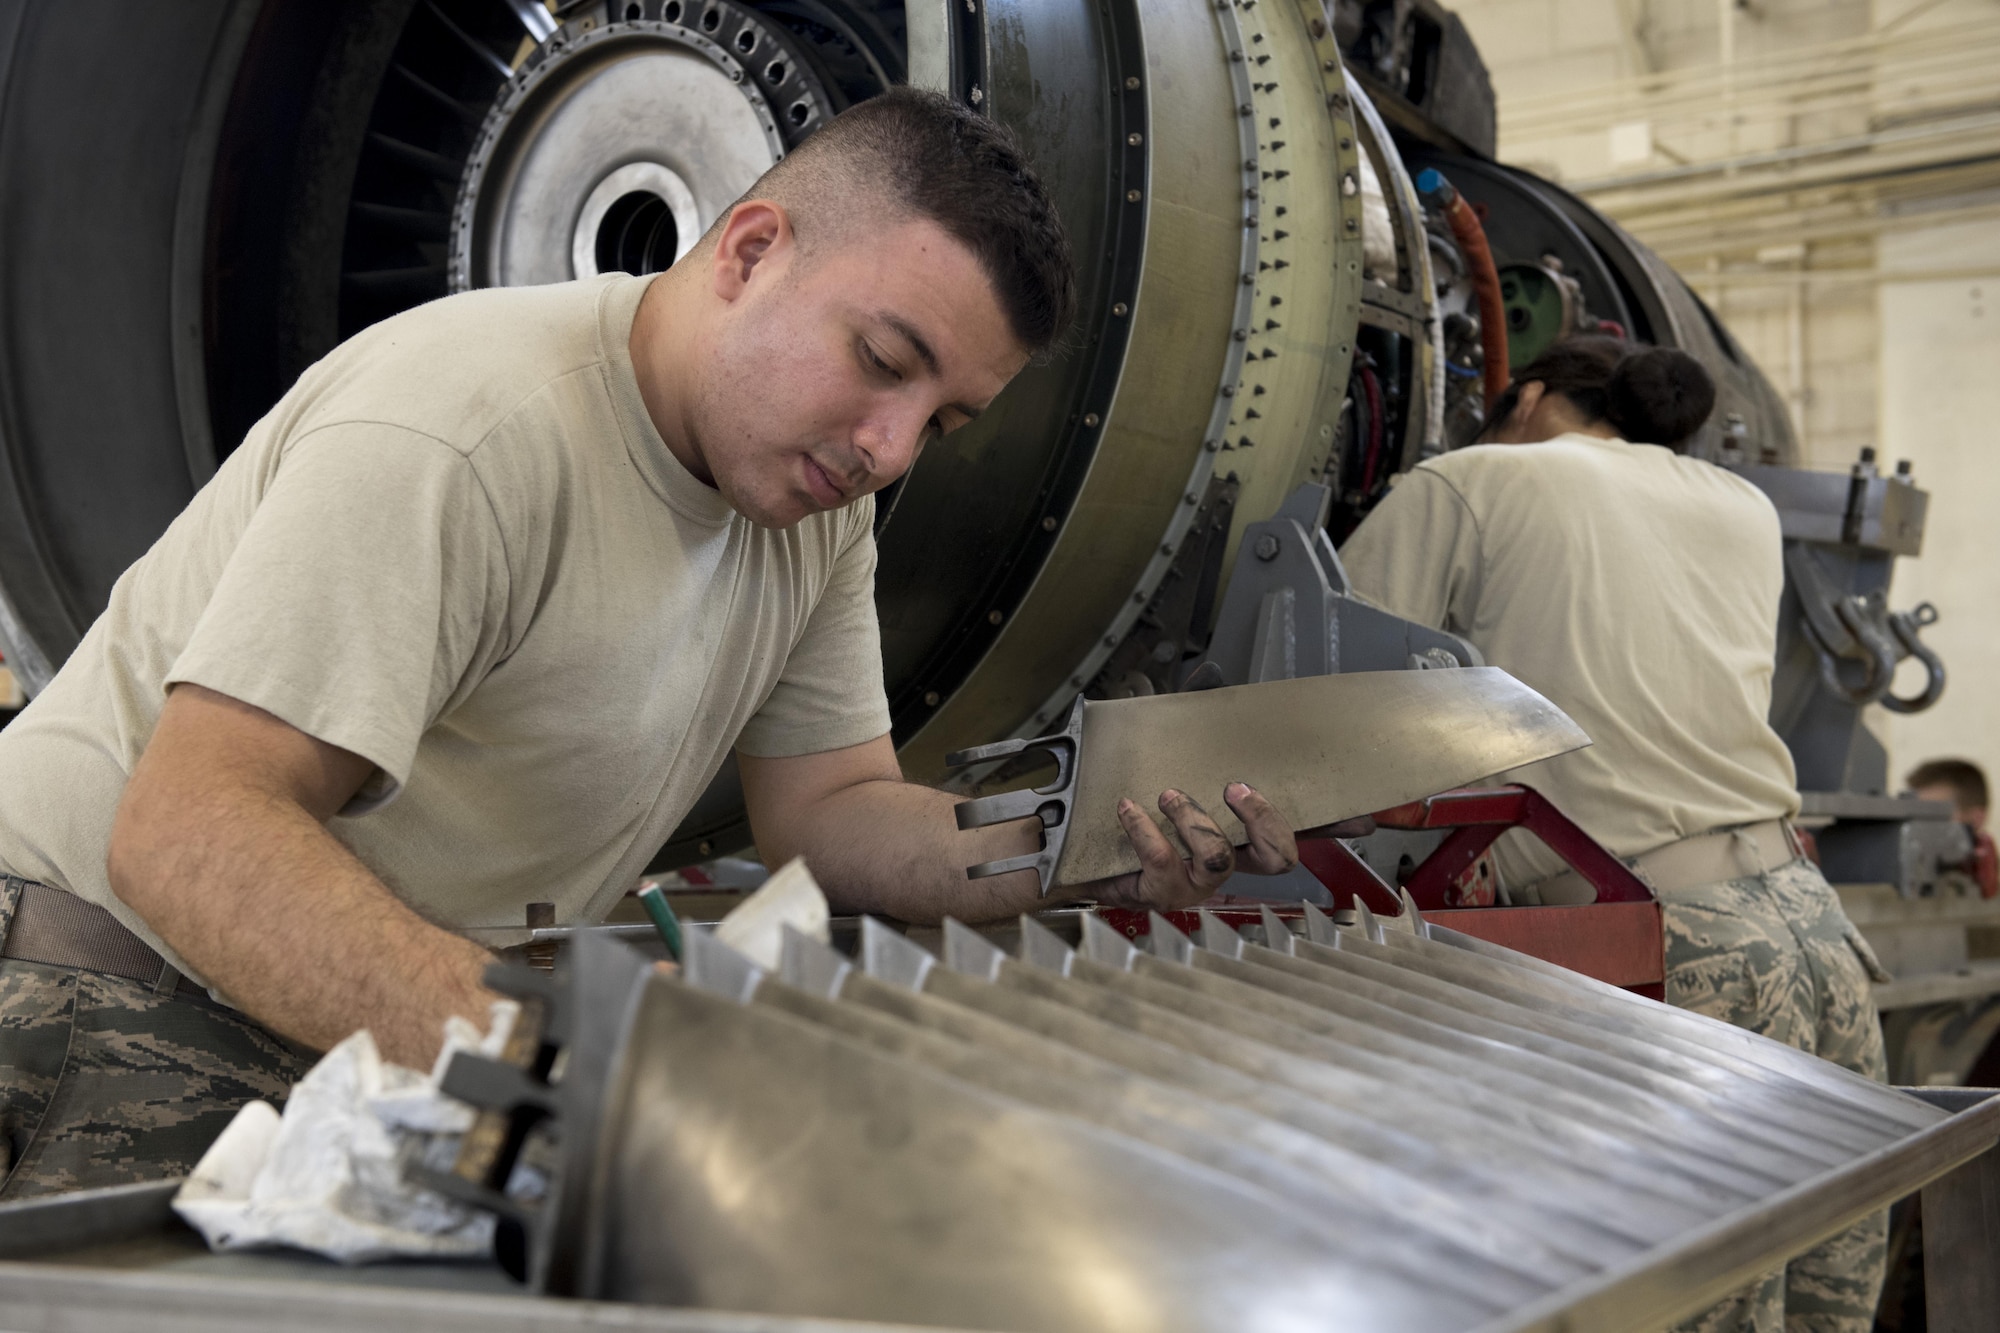 U.S. Air Force Senior Airman Steven Valencia, 18th Component Maintenance Squadron aerospace propulsion journeyman, cleans and inspects fan blades of a TF-34 engine July 6, 2017, at Kadena Air Base, Japan. The fan blades are used to generate approximately 85 percent of the thrust used by A-10 Thunderbolt II aircraft. (U.S. Air Force photo by Senior Airman John Linzmeier)